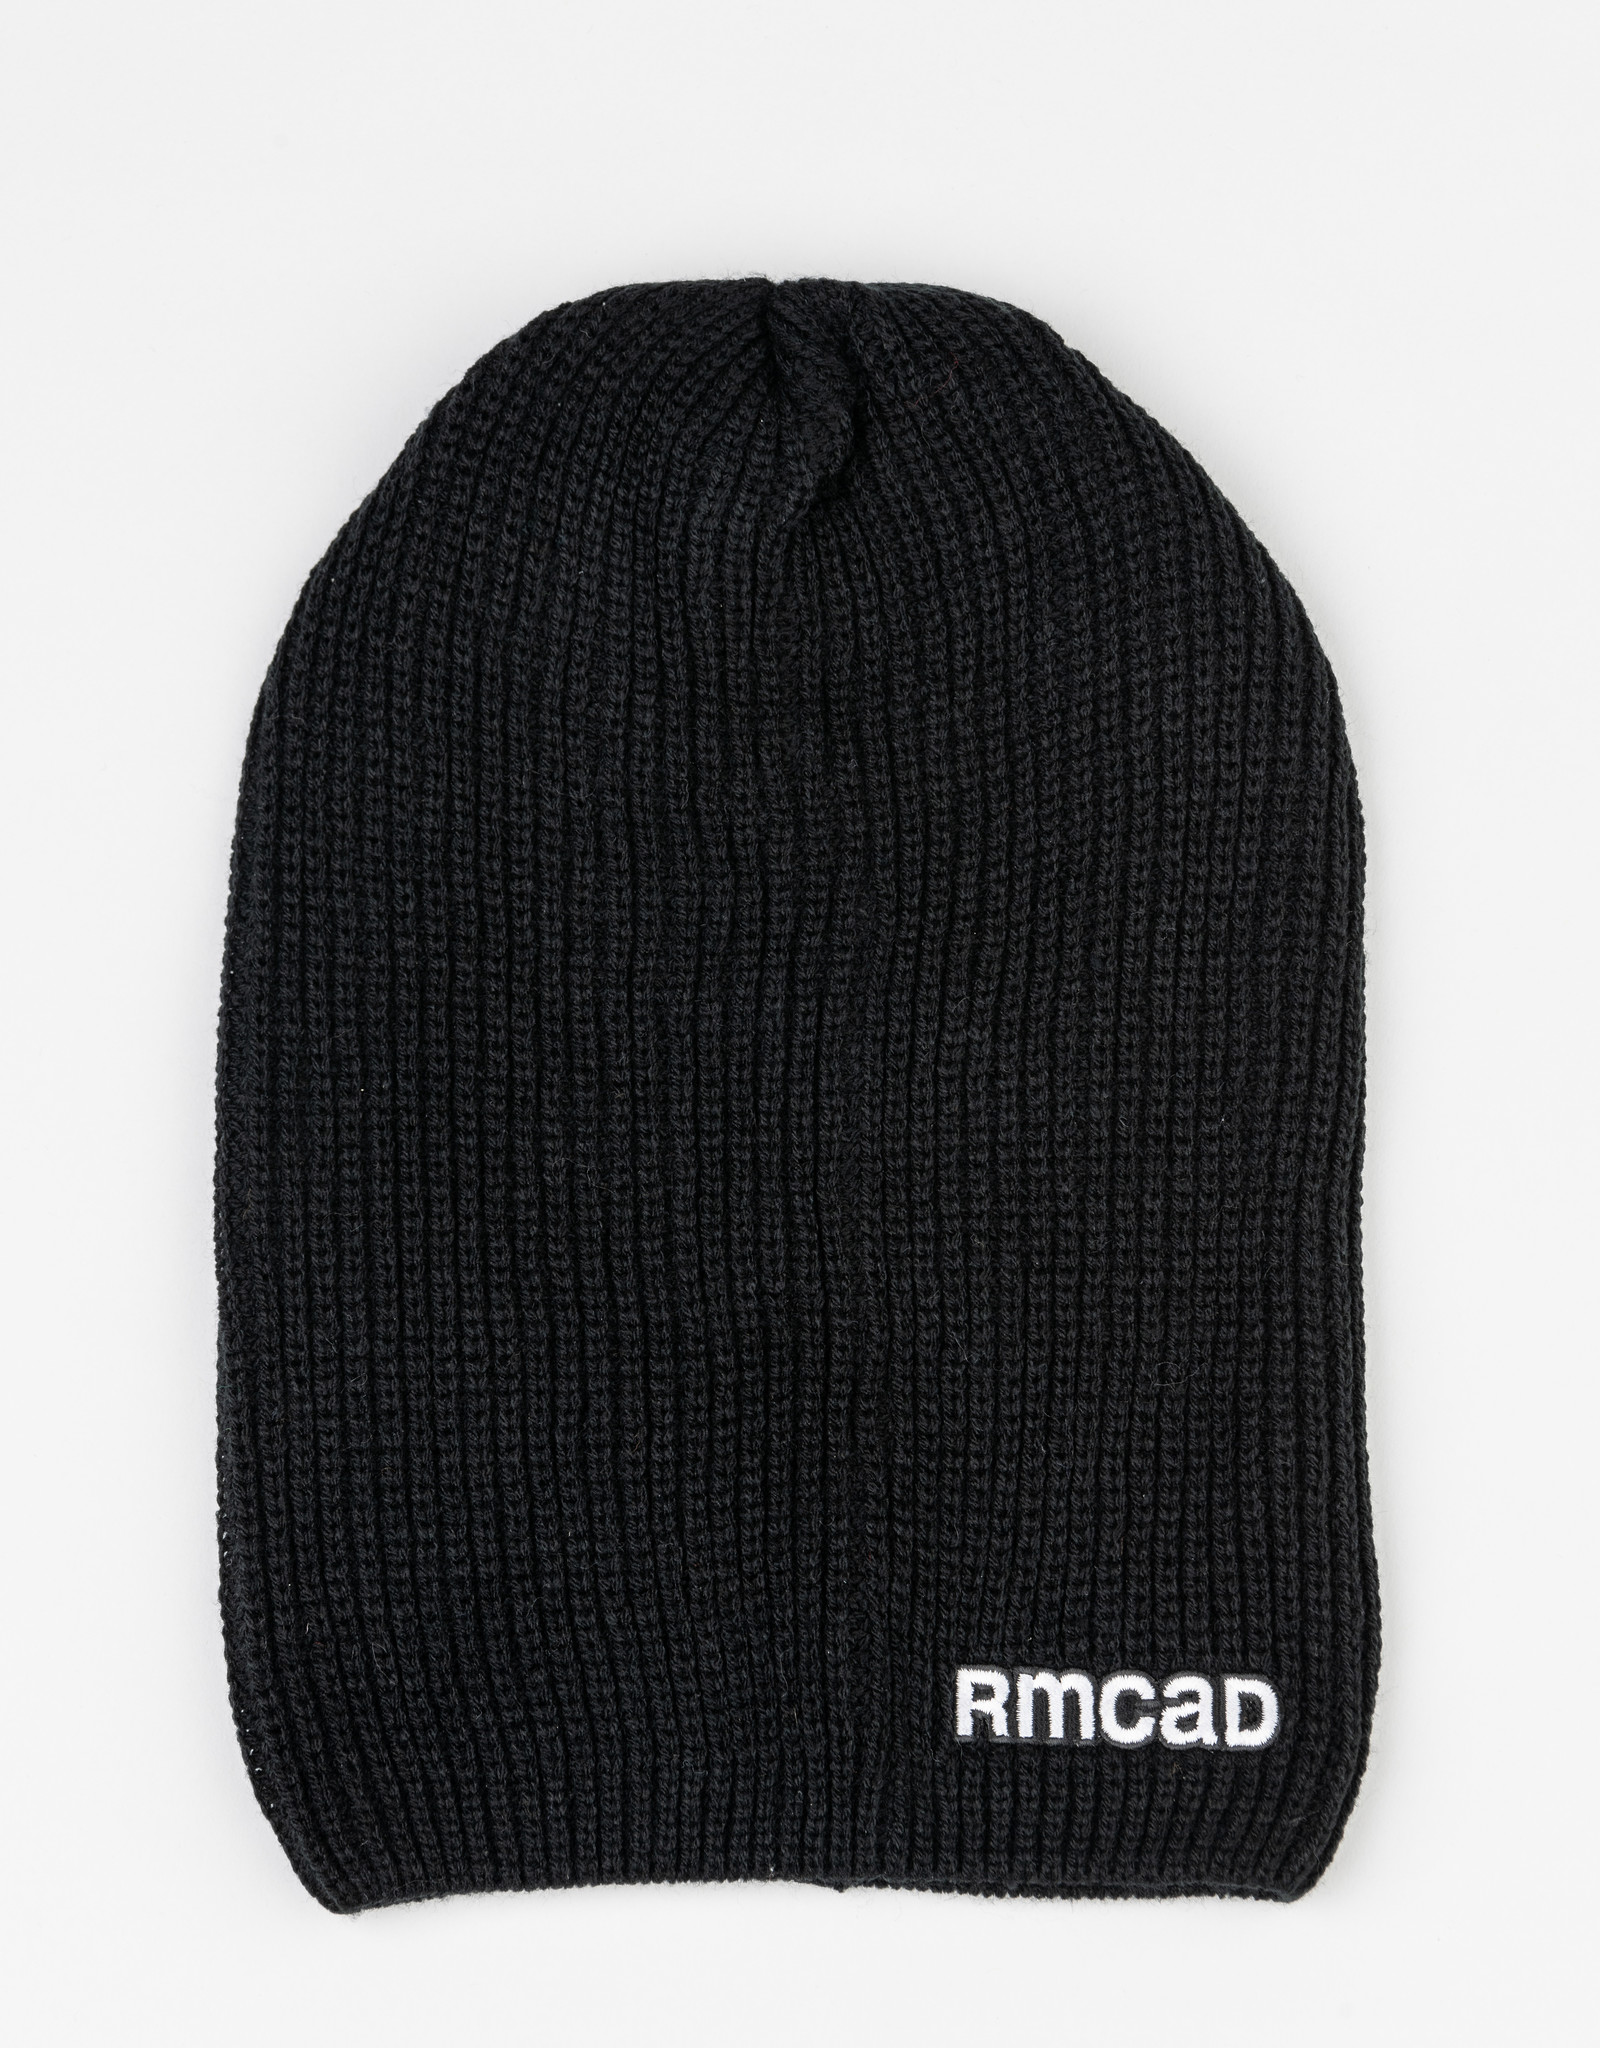 RMCAD Ribbed Loose Knit Slouchy Beanie